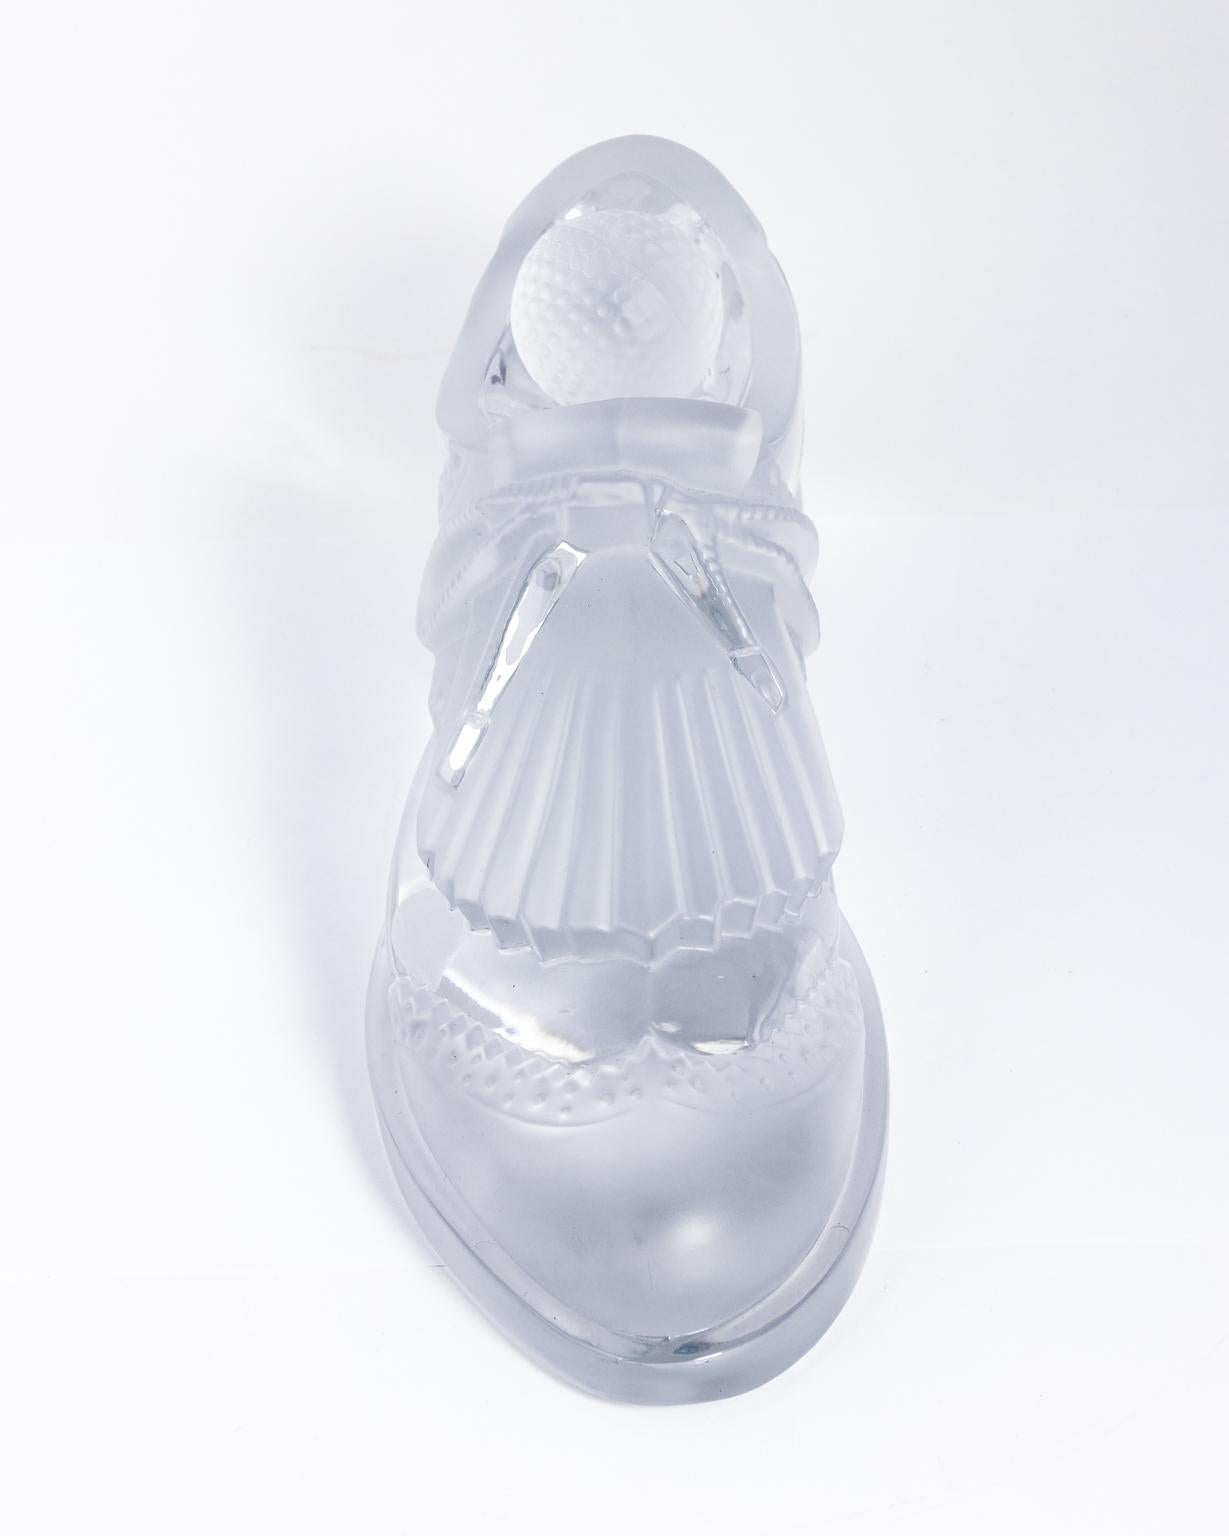 Crystal Golf Shoe and Bell by Royales De Champagne For Sale 4